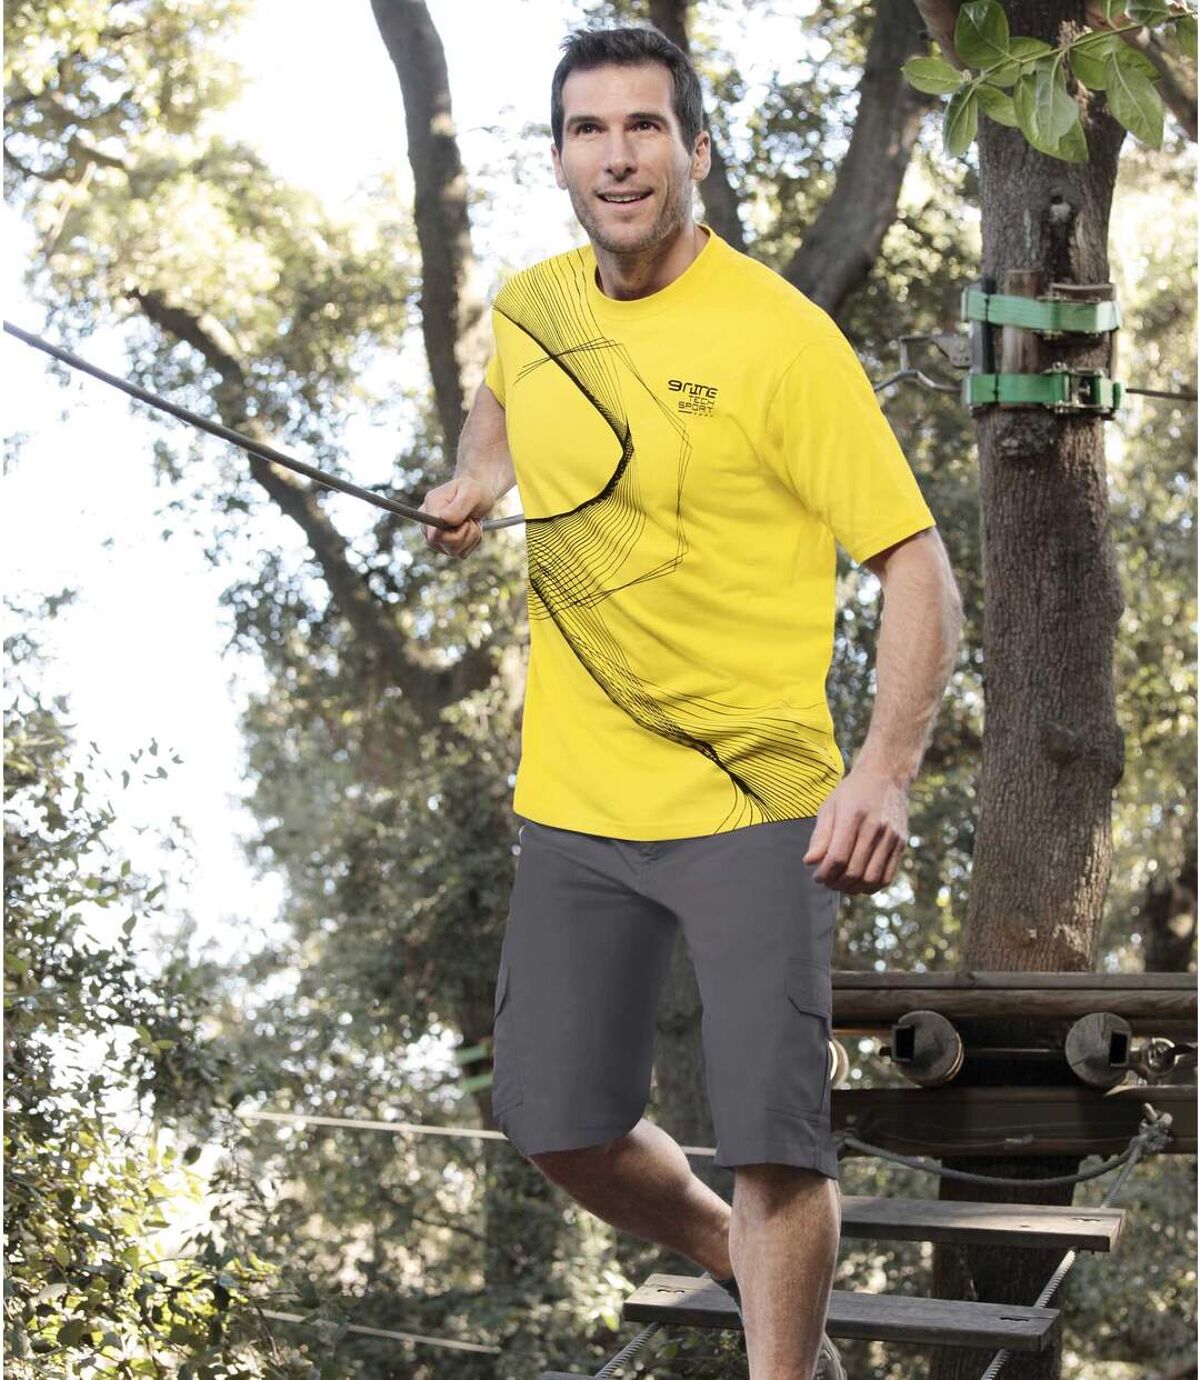 Pack of 2 Men's Sporty T-Shirts - Yellow Gray Atlas For Men